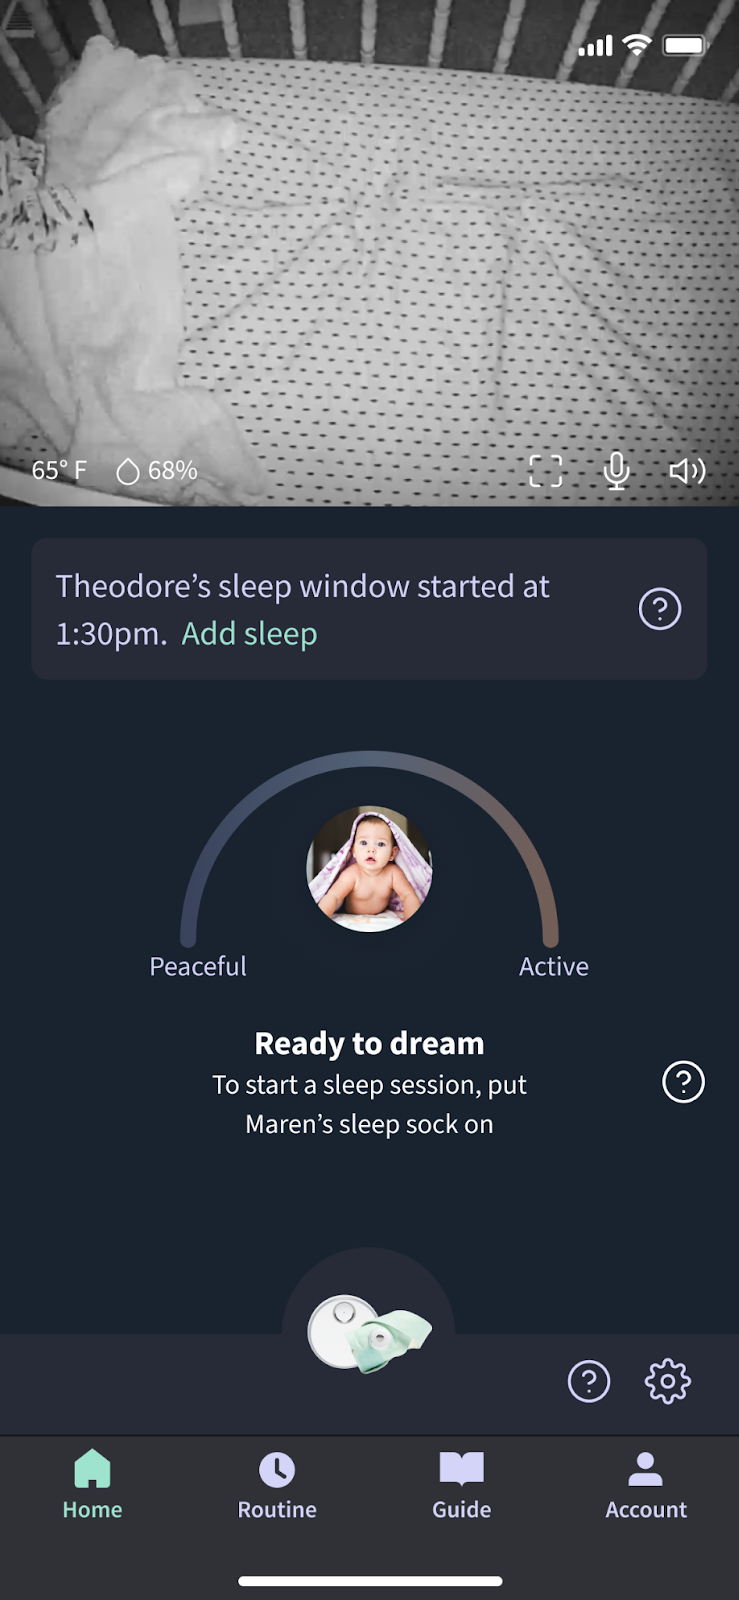 Theodore_s_sleep_window_started_at.png